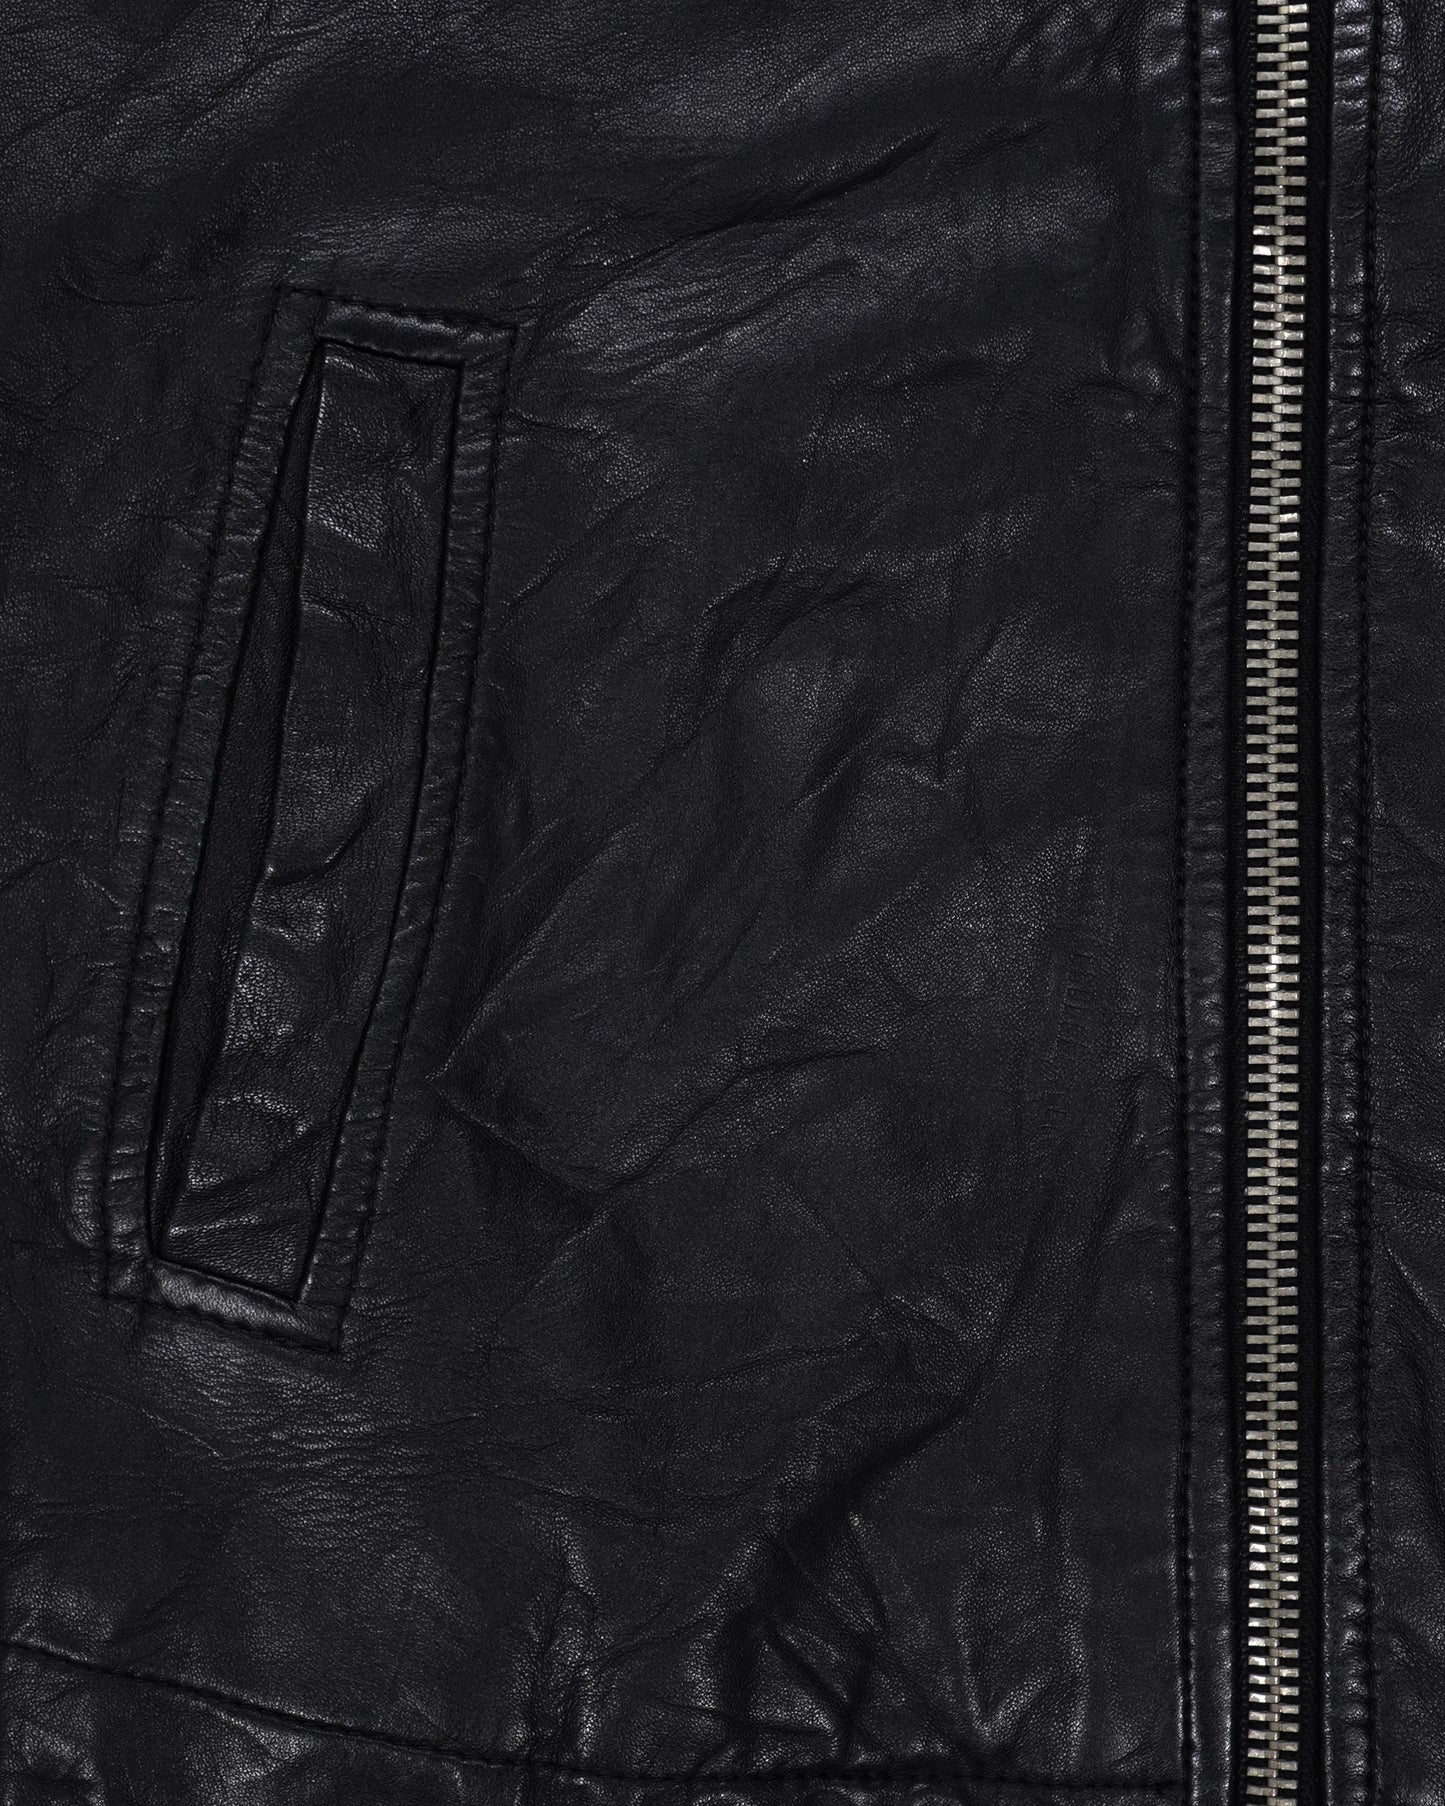 Rick Owens Leather Jacket - SS08 "Creatch"